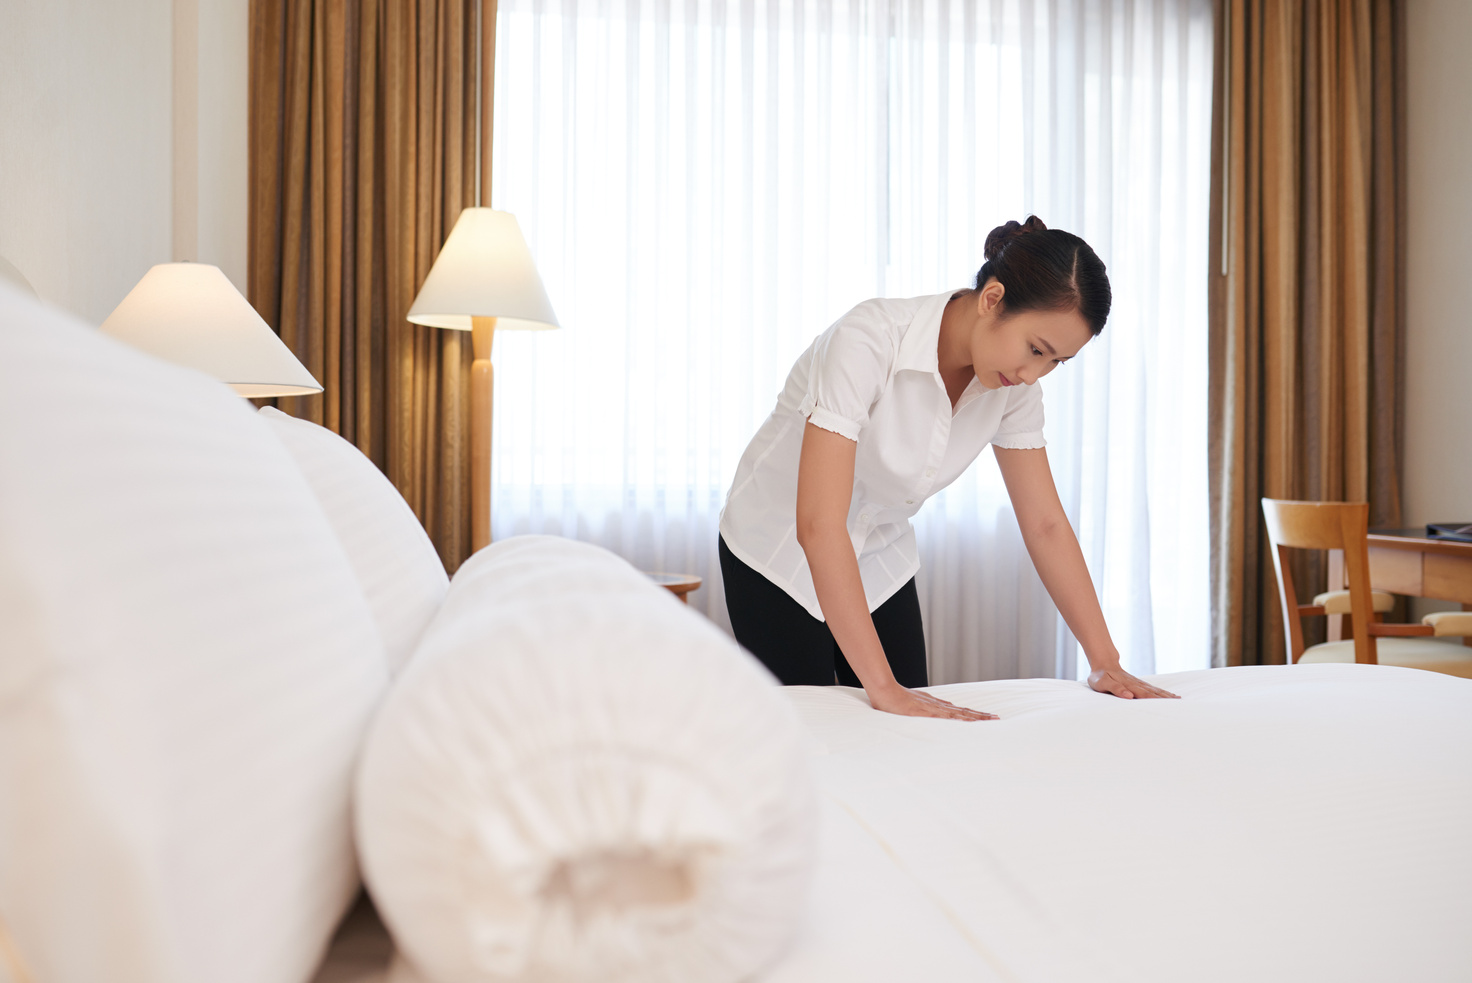 Housekeeper Changing Linen in a Hotel Room